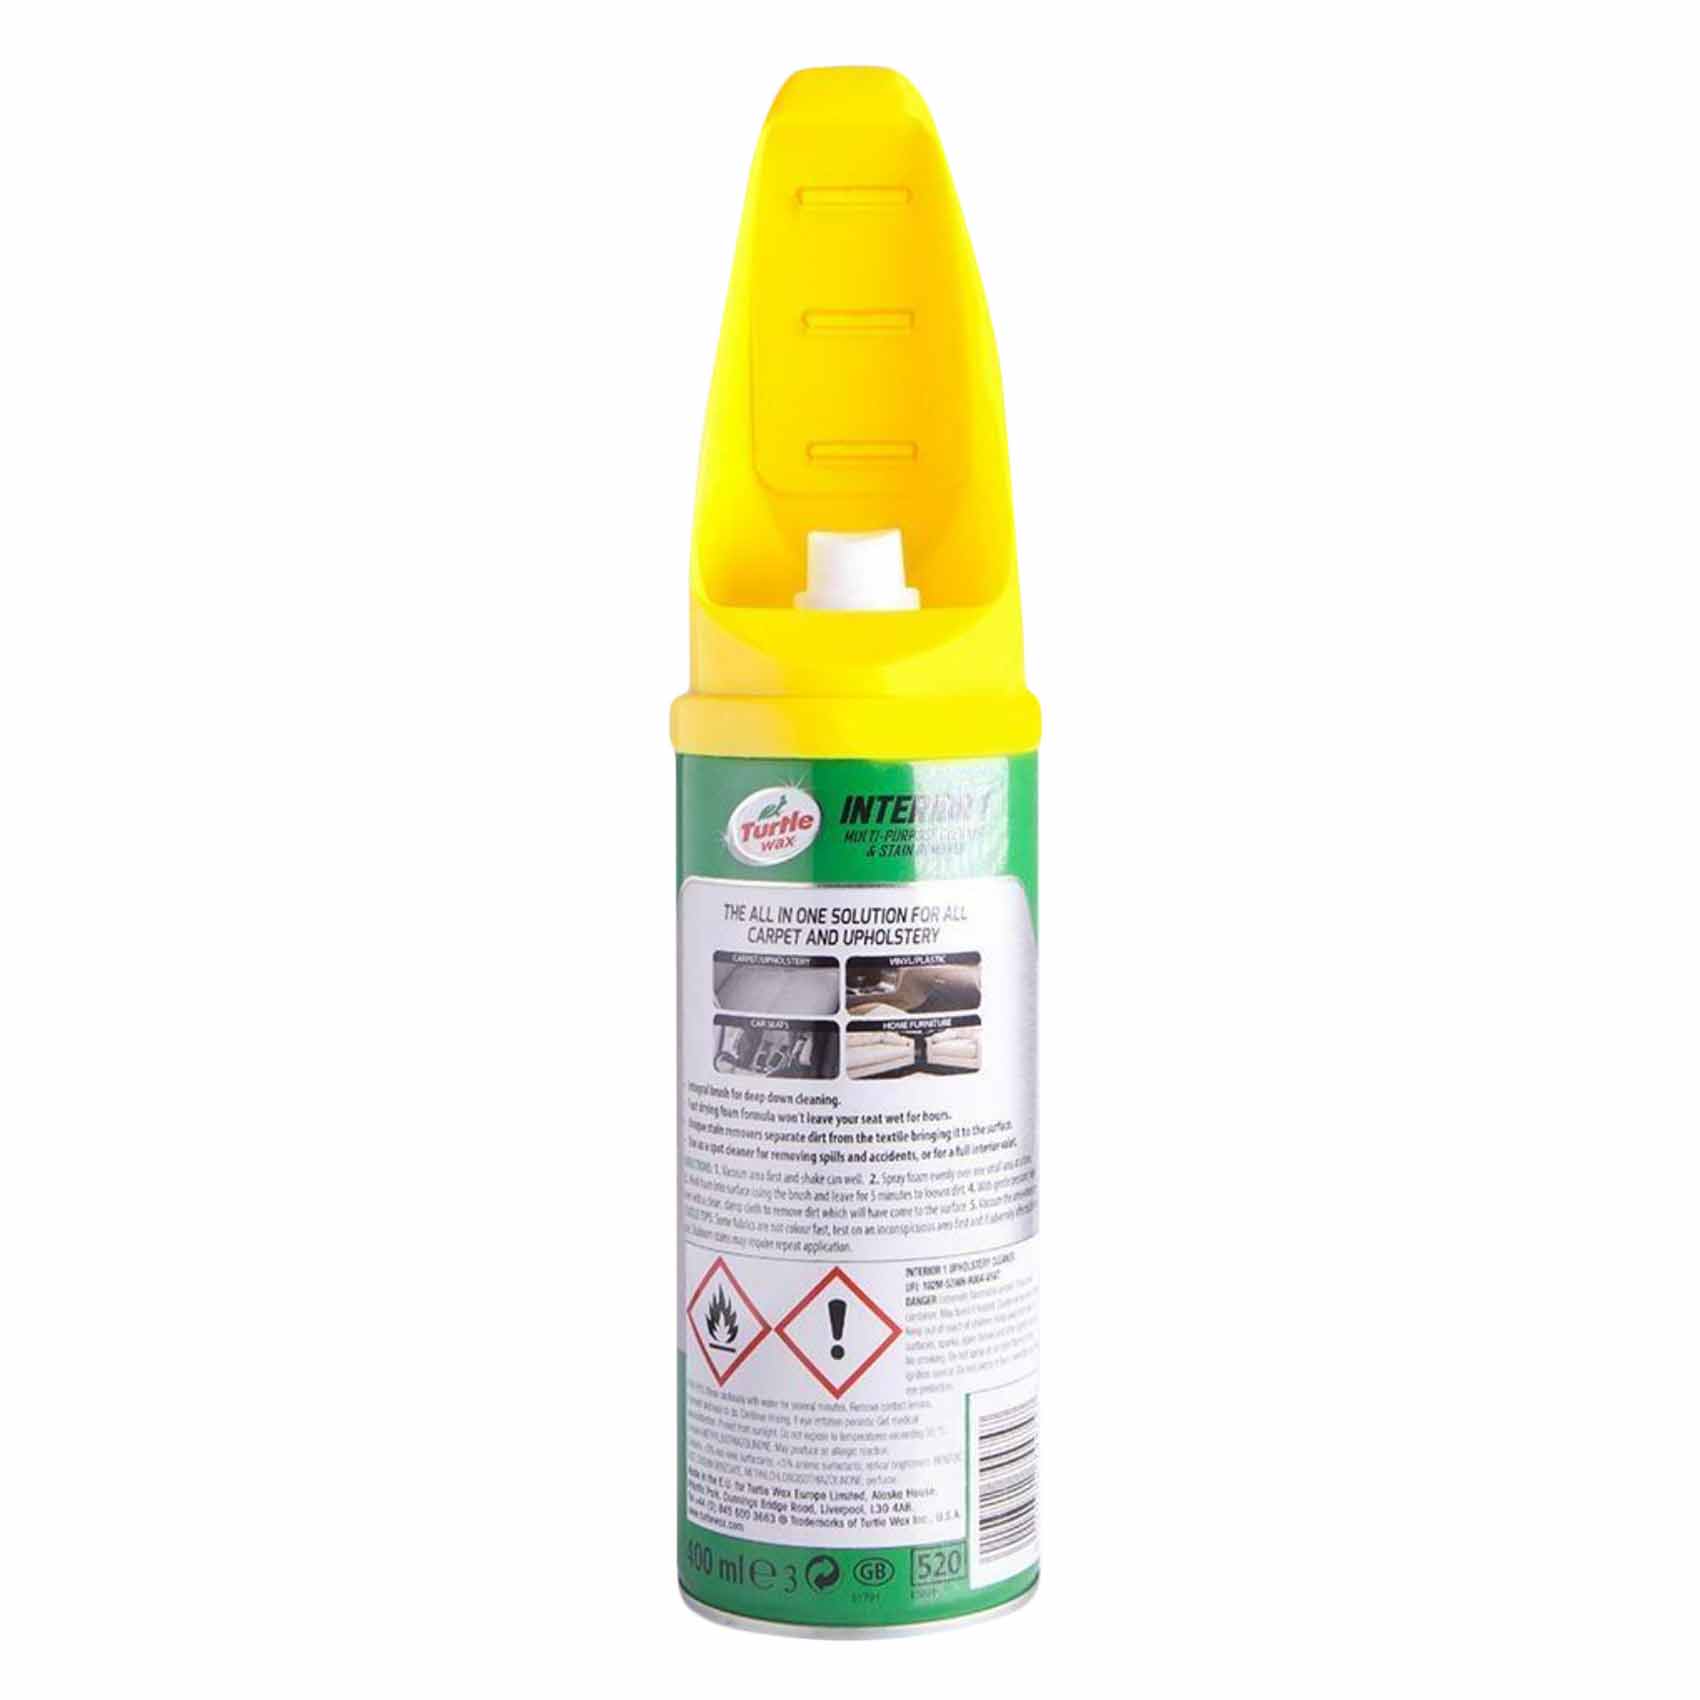 Turtle Multipurpose Cleaner With Stain Remover Brush 400ml